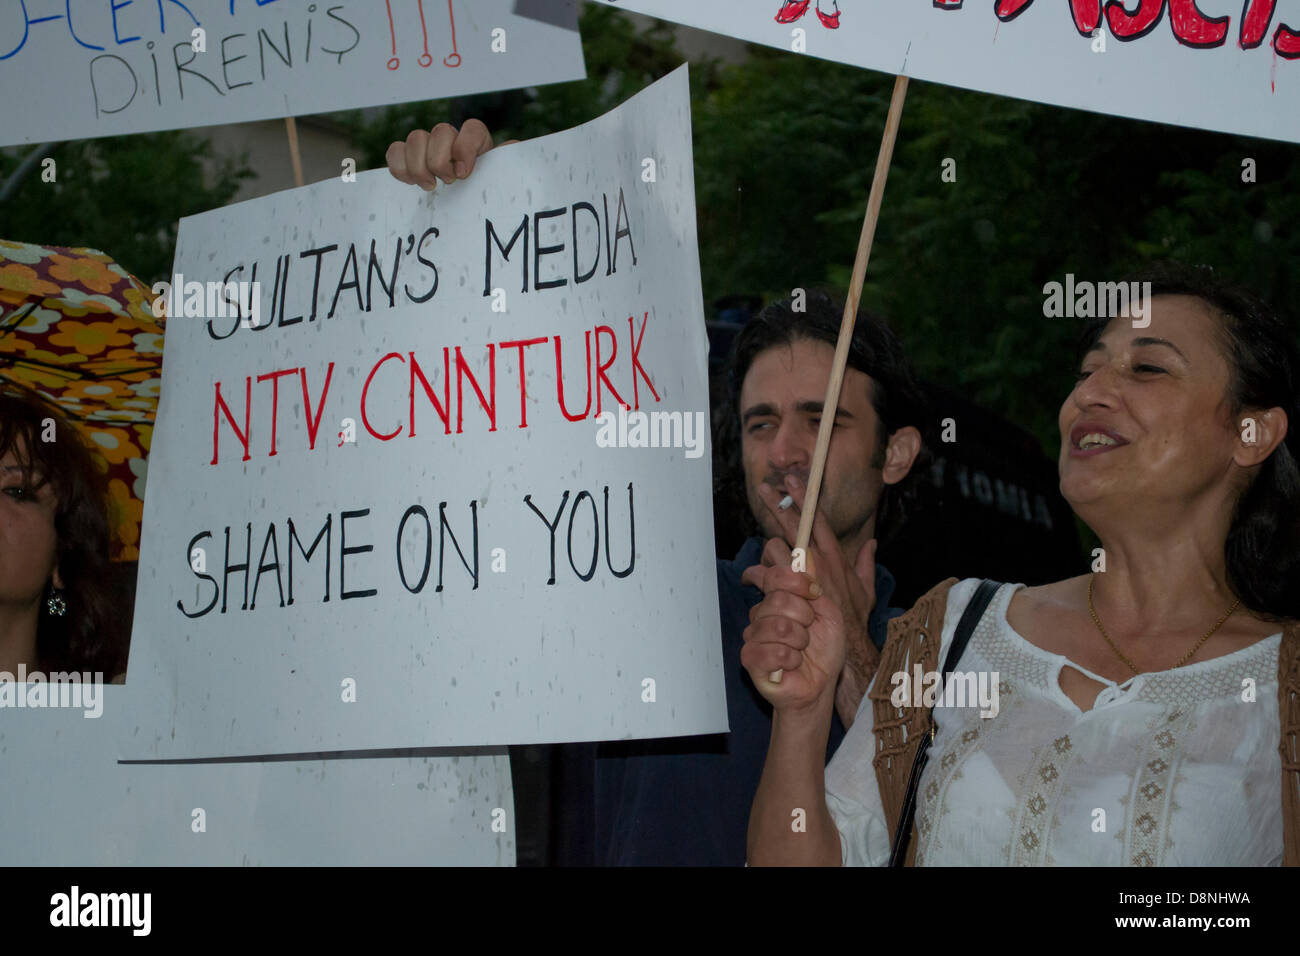 Athens, Greece, June 1st 2013. Turks protest outside their embassy against the recent repression in Turkey. Men and women held anti-government placards and shouted slogans against the Turkish government and media. Credit:  Nikolas Georgiou / Alamy Live News Stock Photo